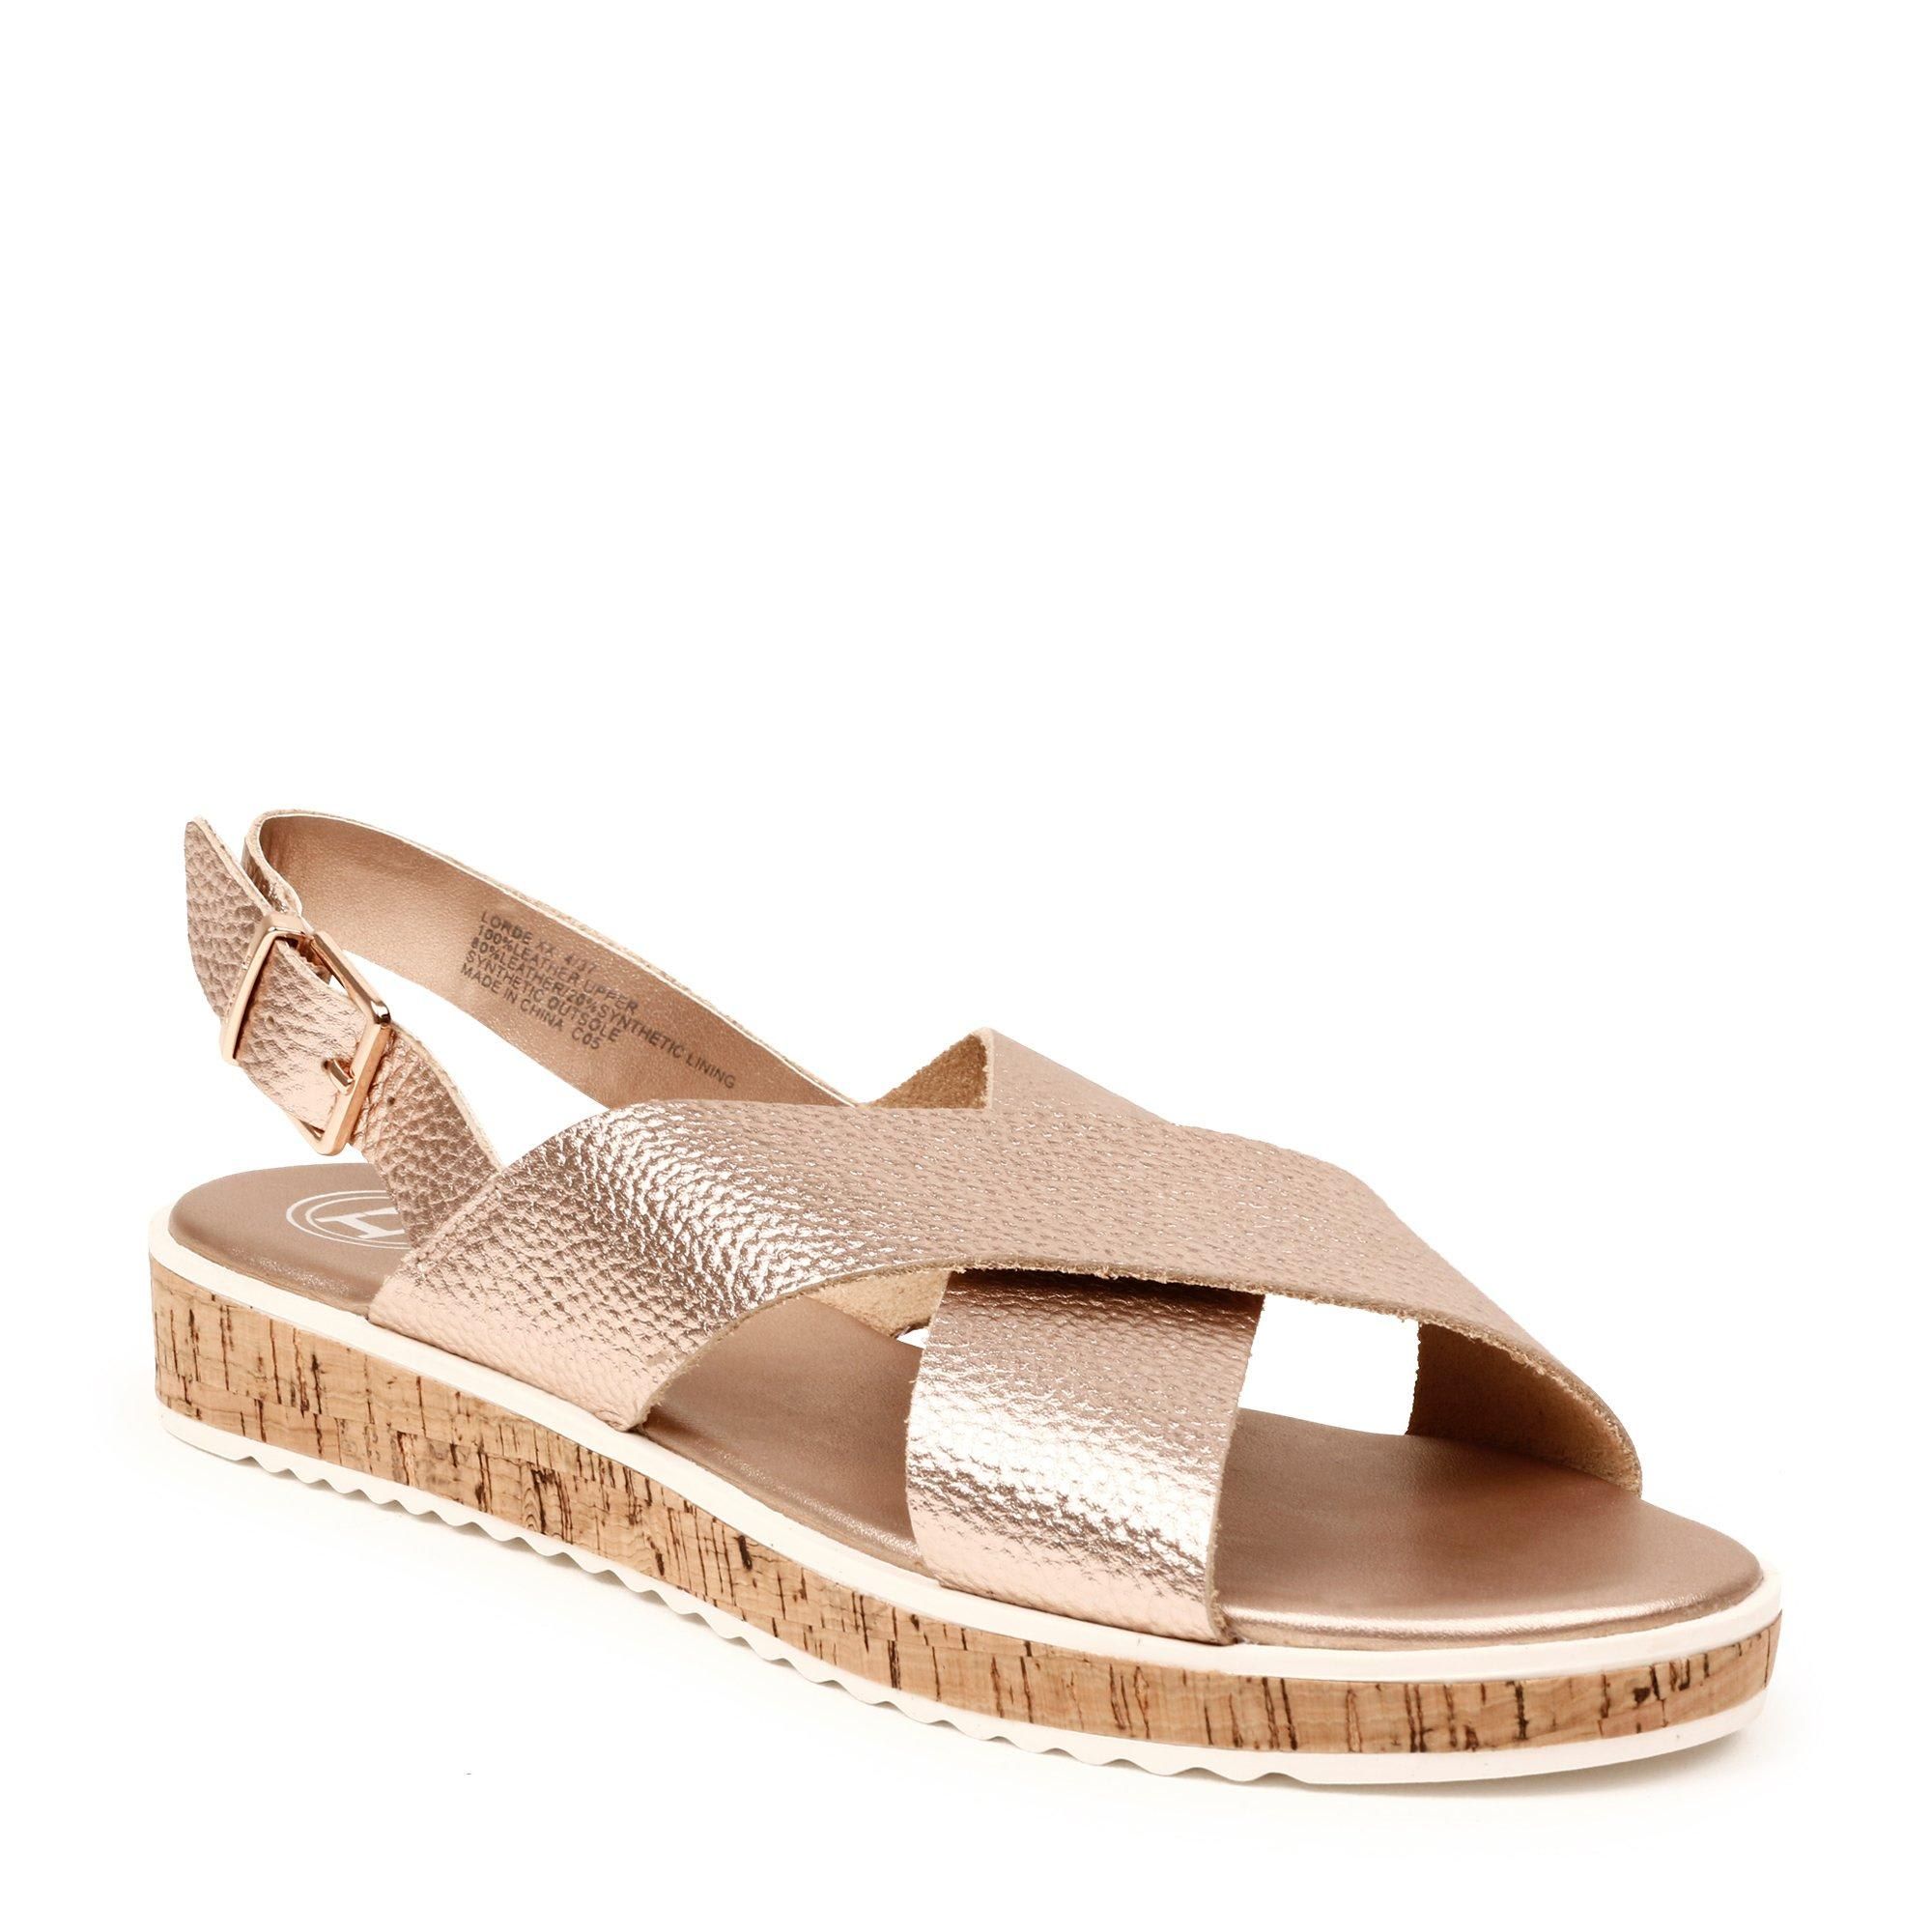 Channel casual elegance with this fetching Dune London sandal. Designed with stylish cross straps and a buckle fastening at the ankle. A flat cork heel and shark sole complete this summer style.